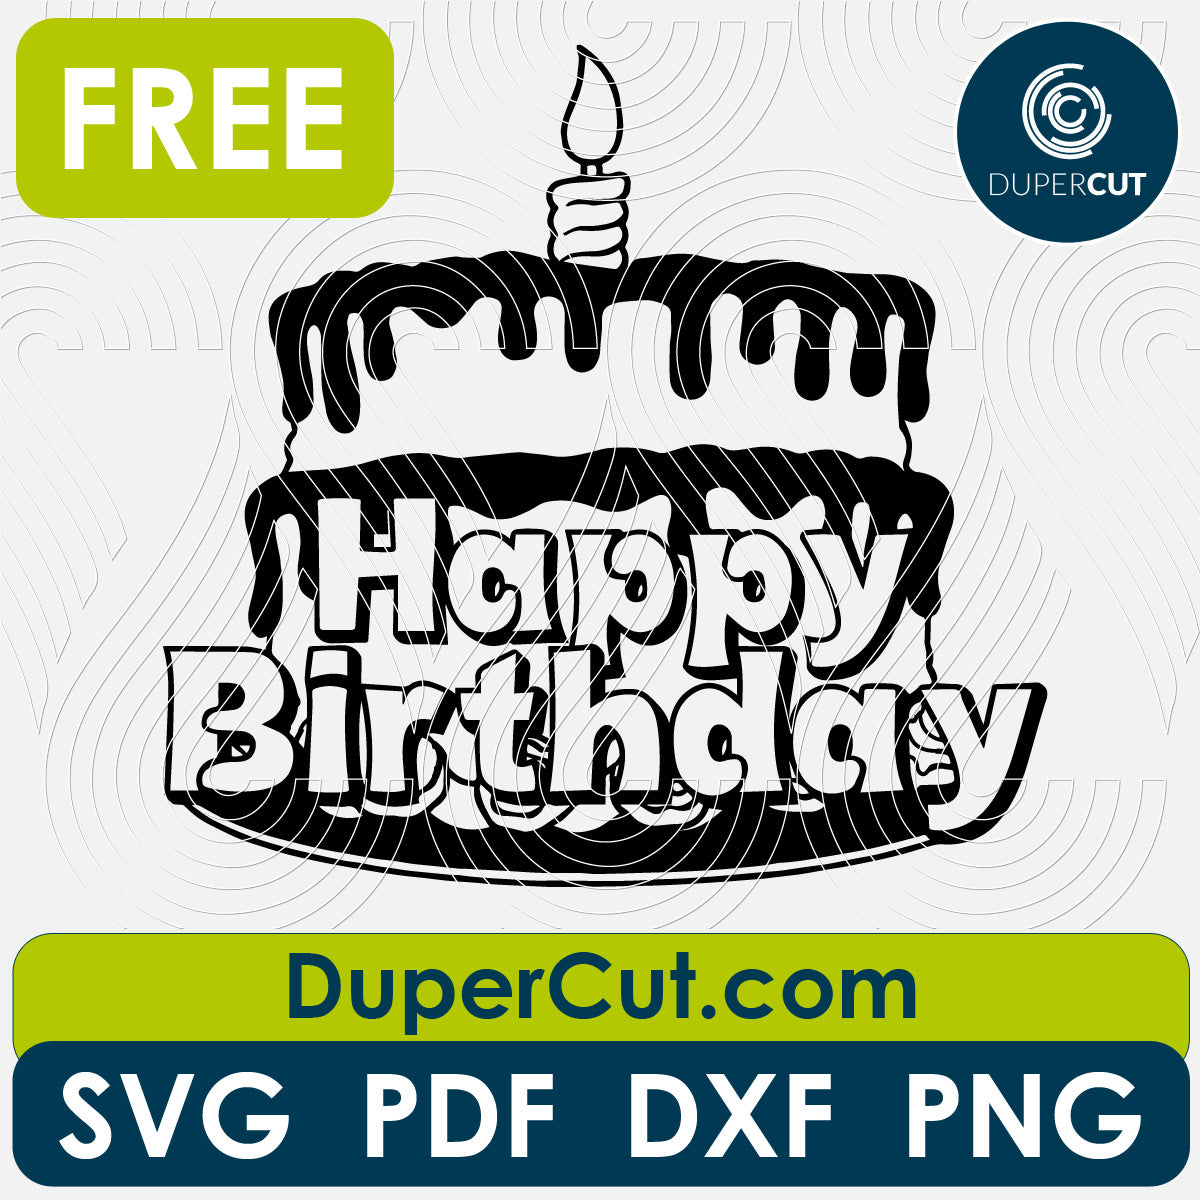 Birthday cake - free cutting files SVG DXF vector template for laser cutting and engraving. For Glowforge, Cricut, Silhouette, scroll saw, cnc plasma machines by DuperCut